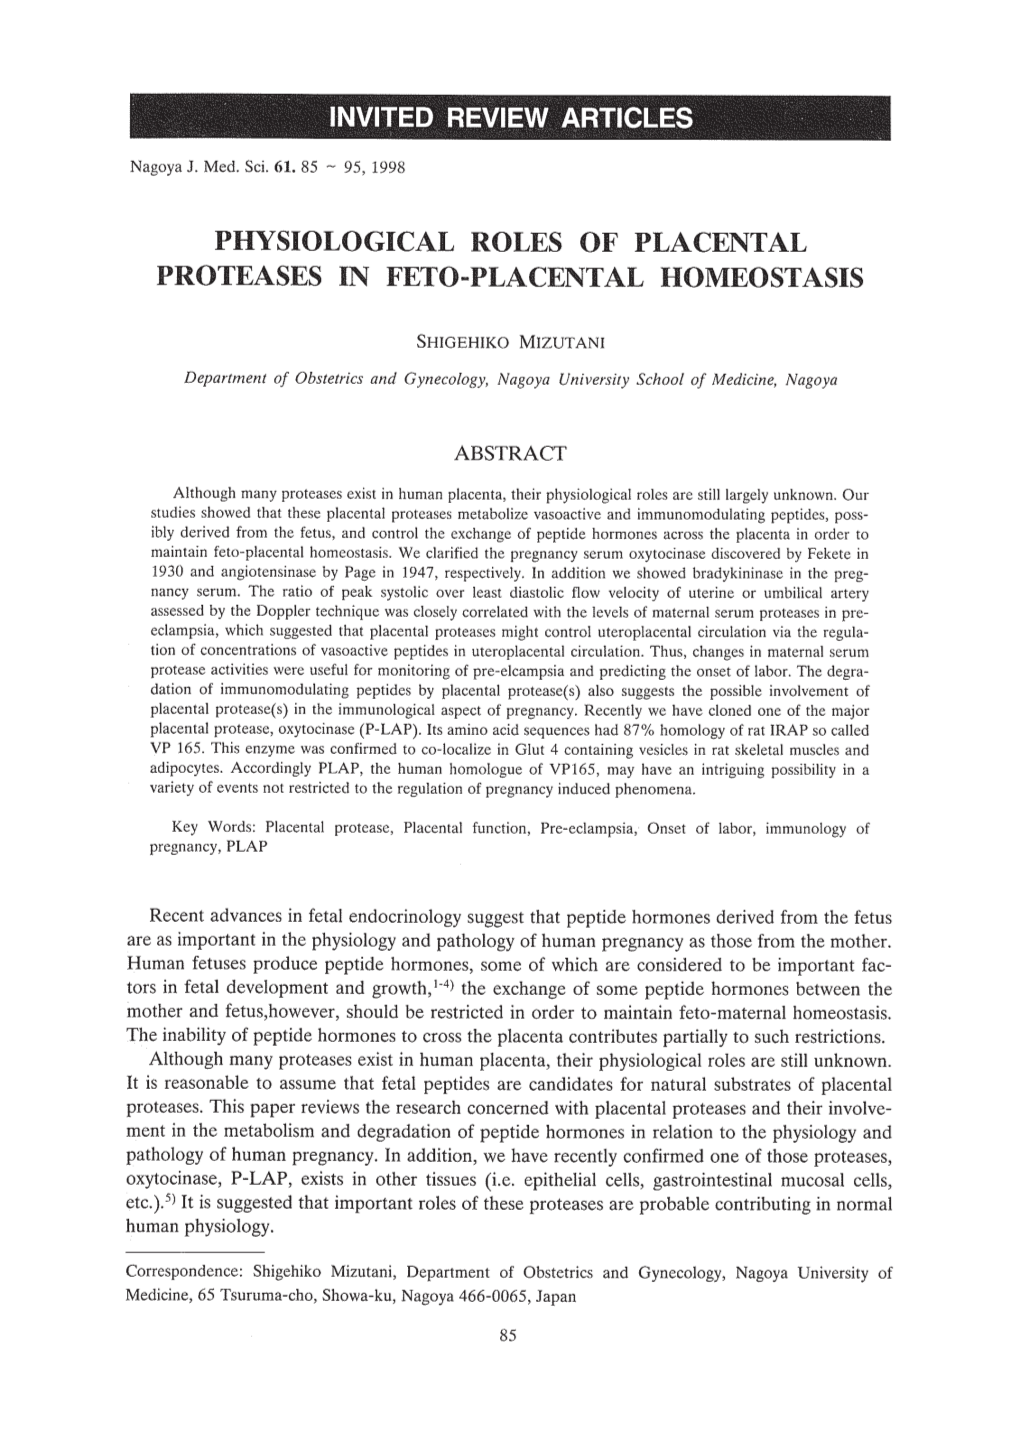 Physiological Roles of Placental Proteases in Feto-Placental Homeostasis